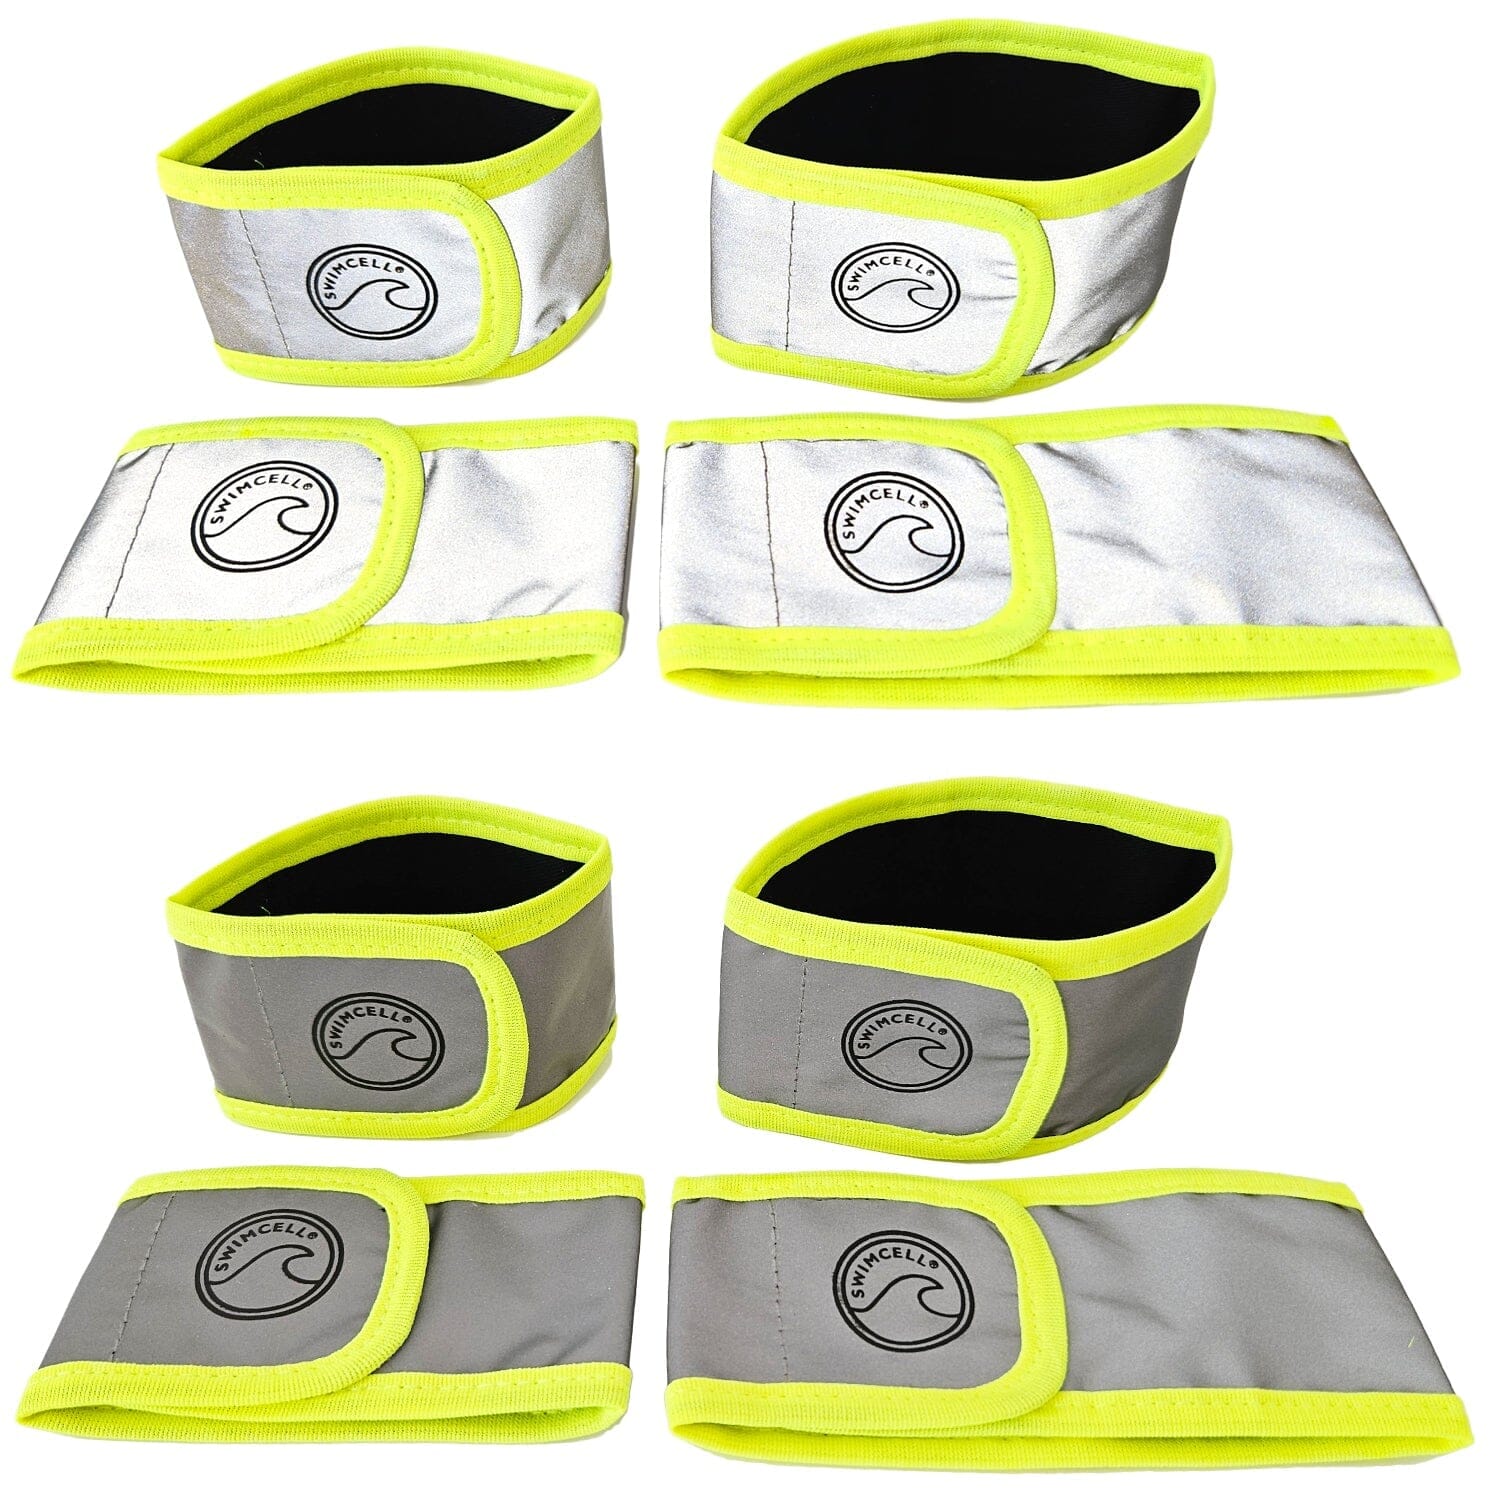 Reflective armbands for running and walking